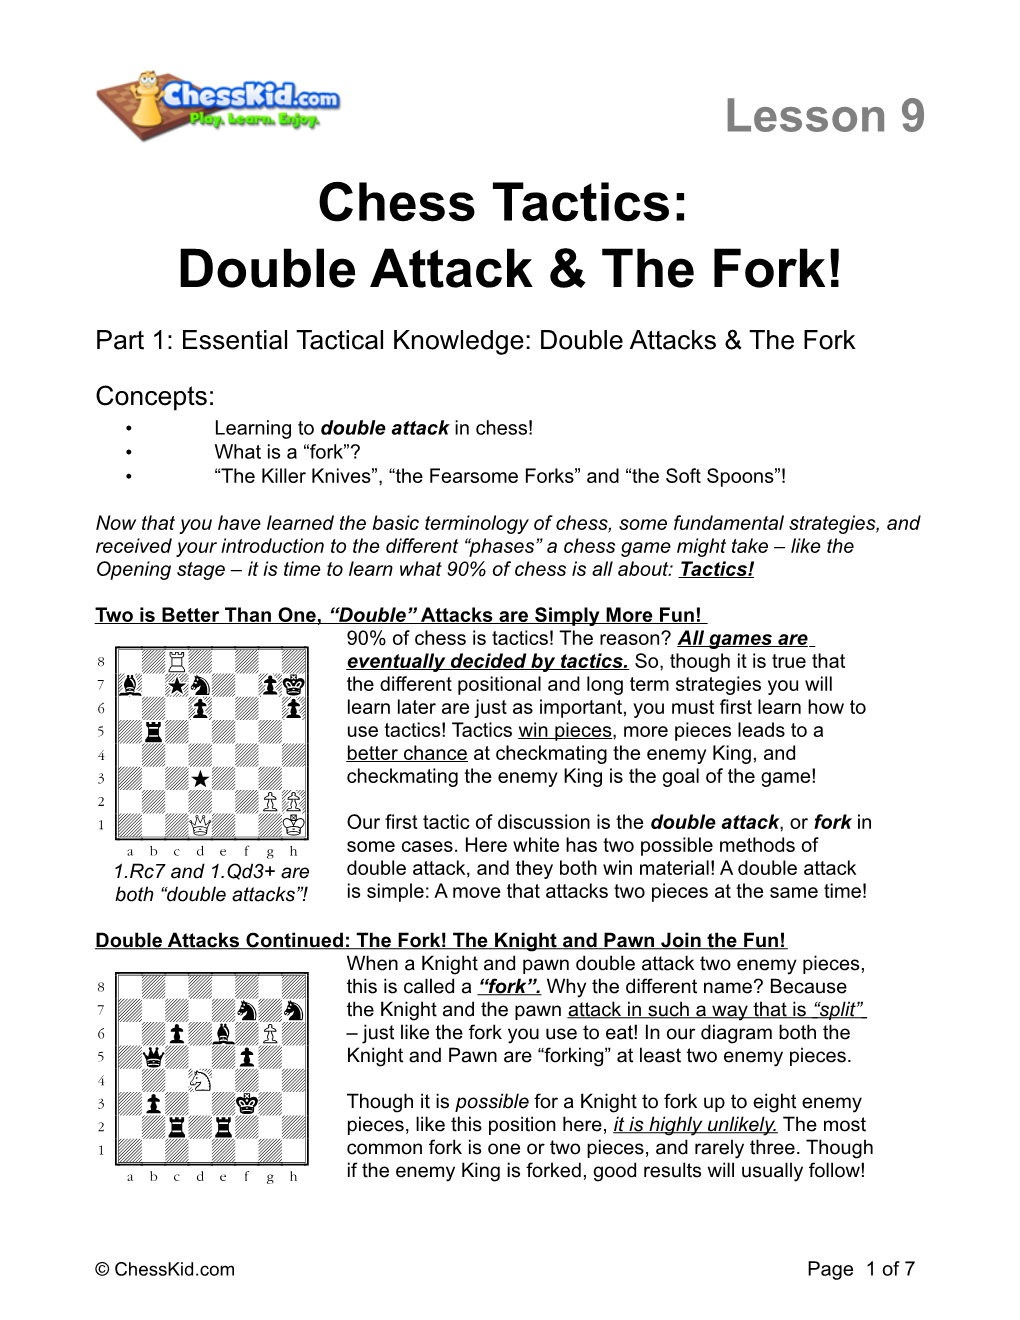 Chess Tactics: Double Attack & the Fork!